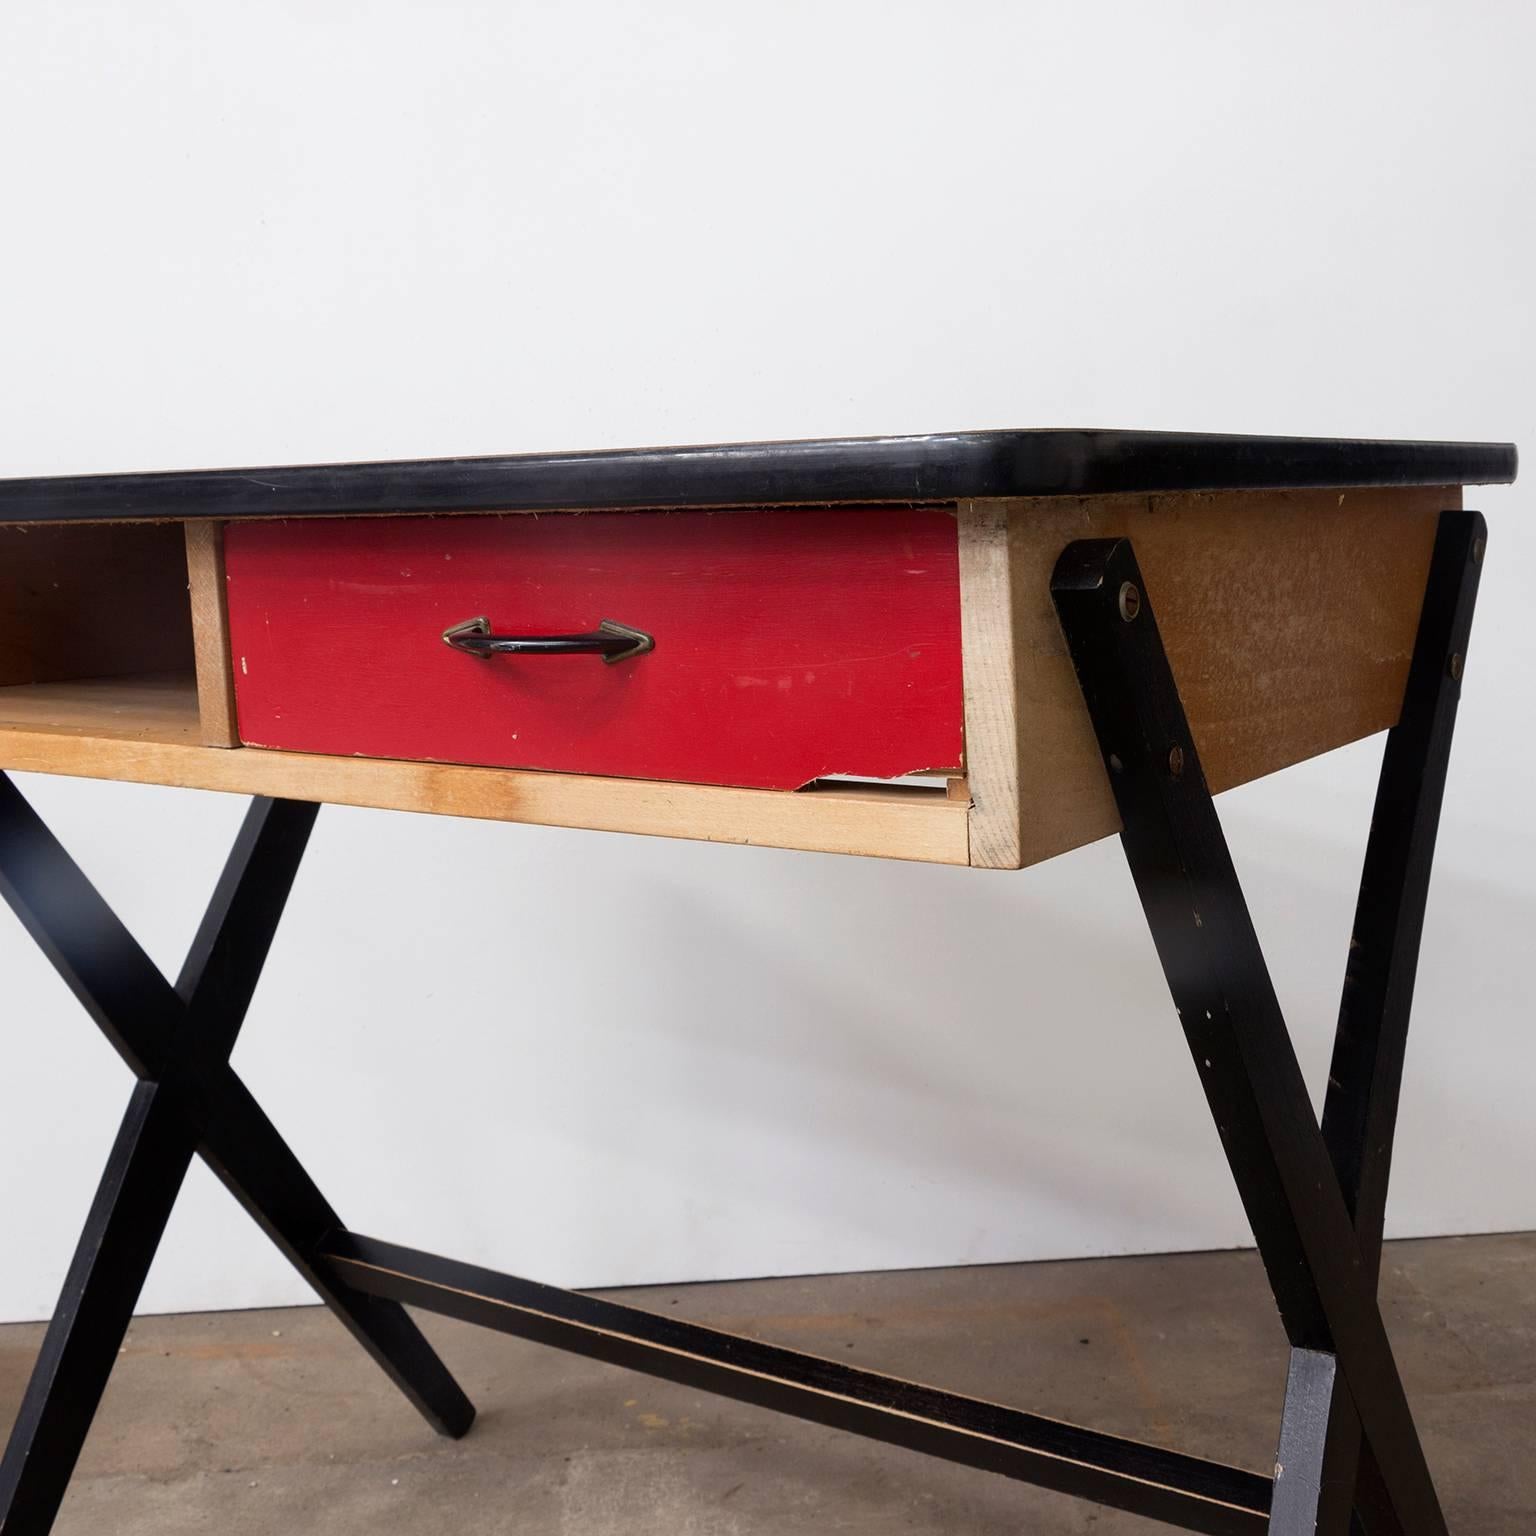 Mid-20th Century 1954, Coen de Vries for Devo Wooden Writing Desk with Red Drawer and Formica Top For Sale